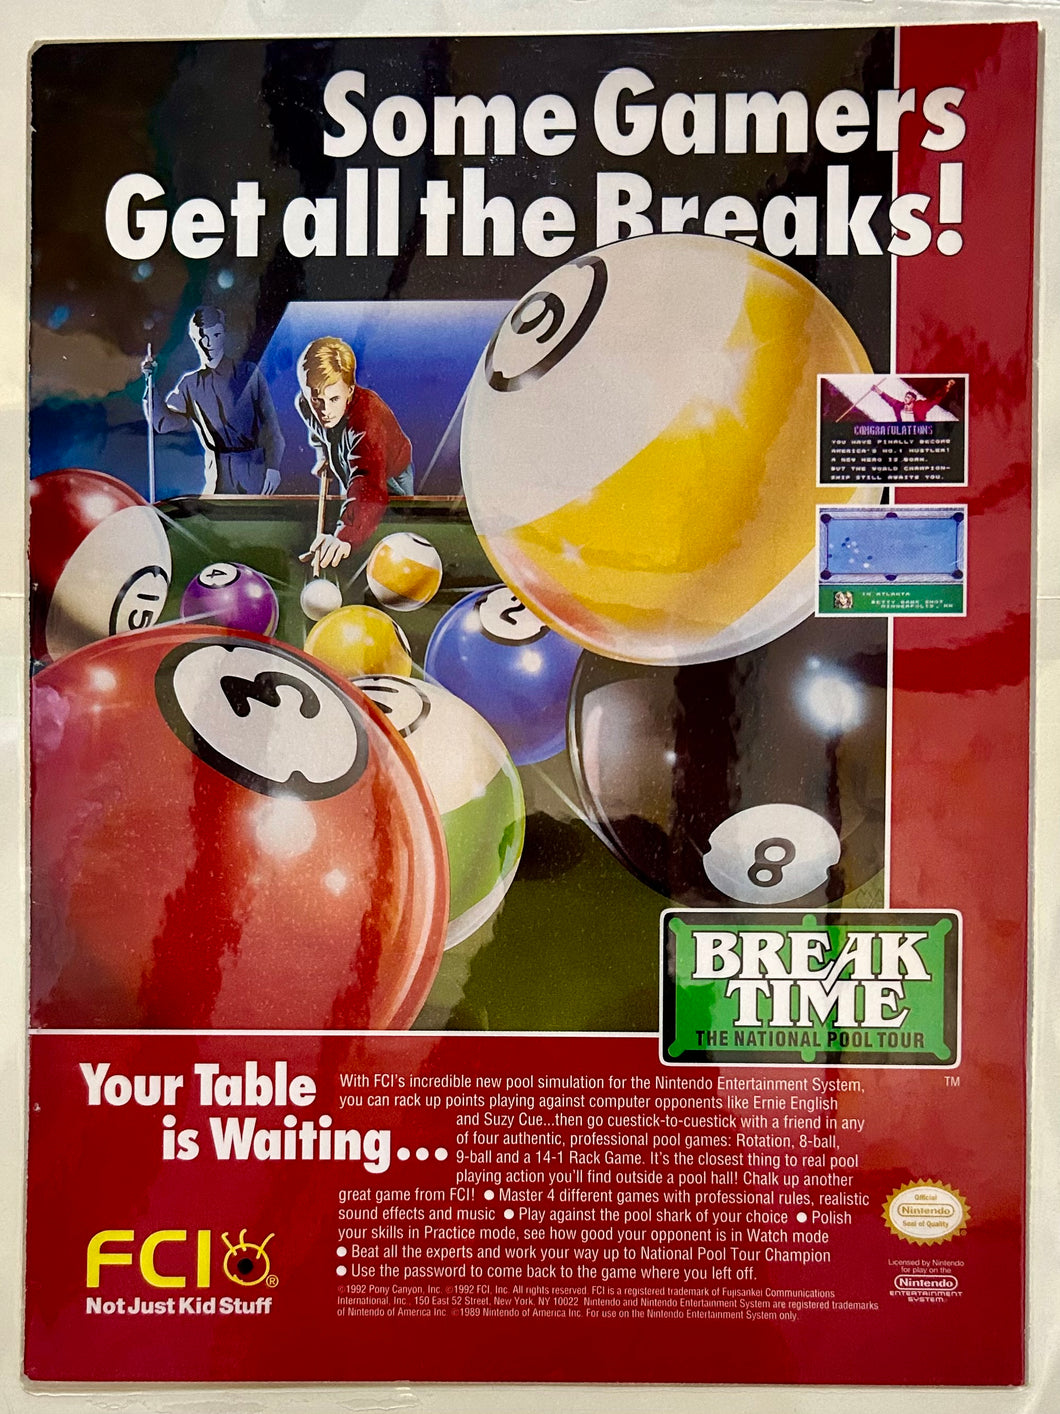 Break Time: The National Pool Tour - NES - Original Vintage Advertisement - Print Ads - Laminated A4 Poster